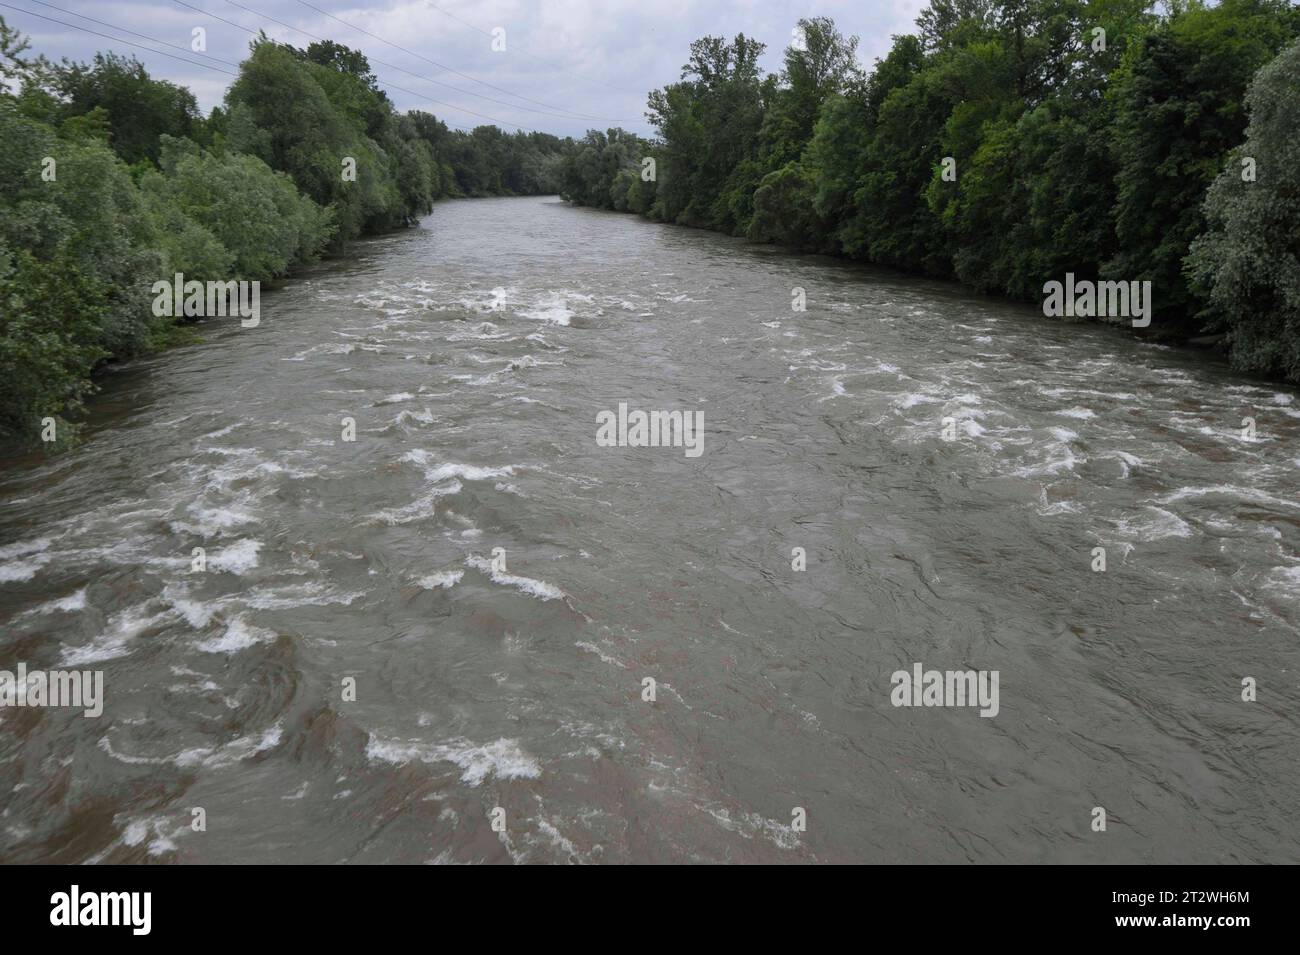 A River With Floating Water, A Natural Watercourse And Landscape A River With Floating Water Credit: Imago/Alamy Live News Stock Photo